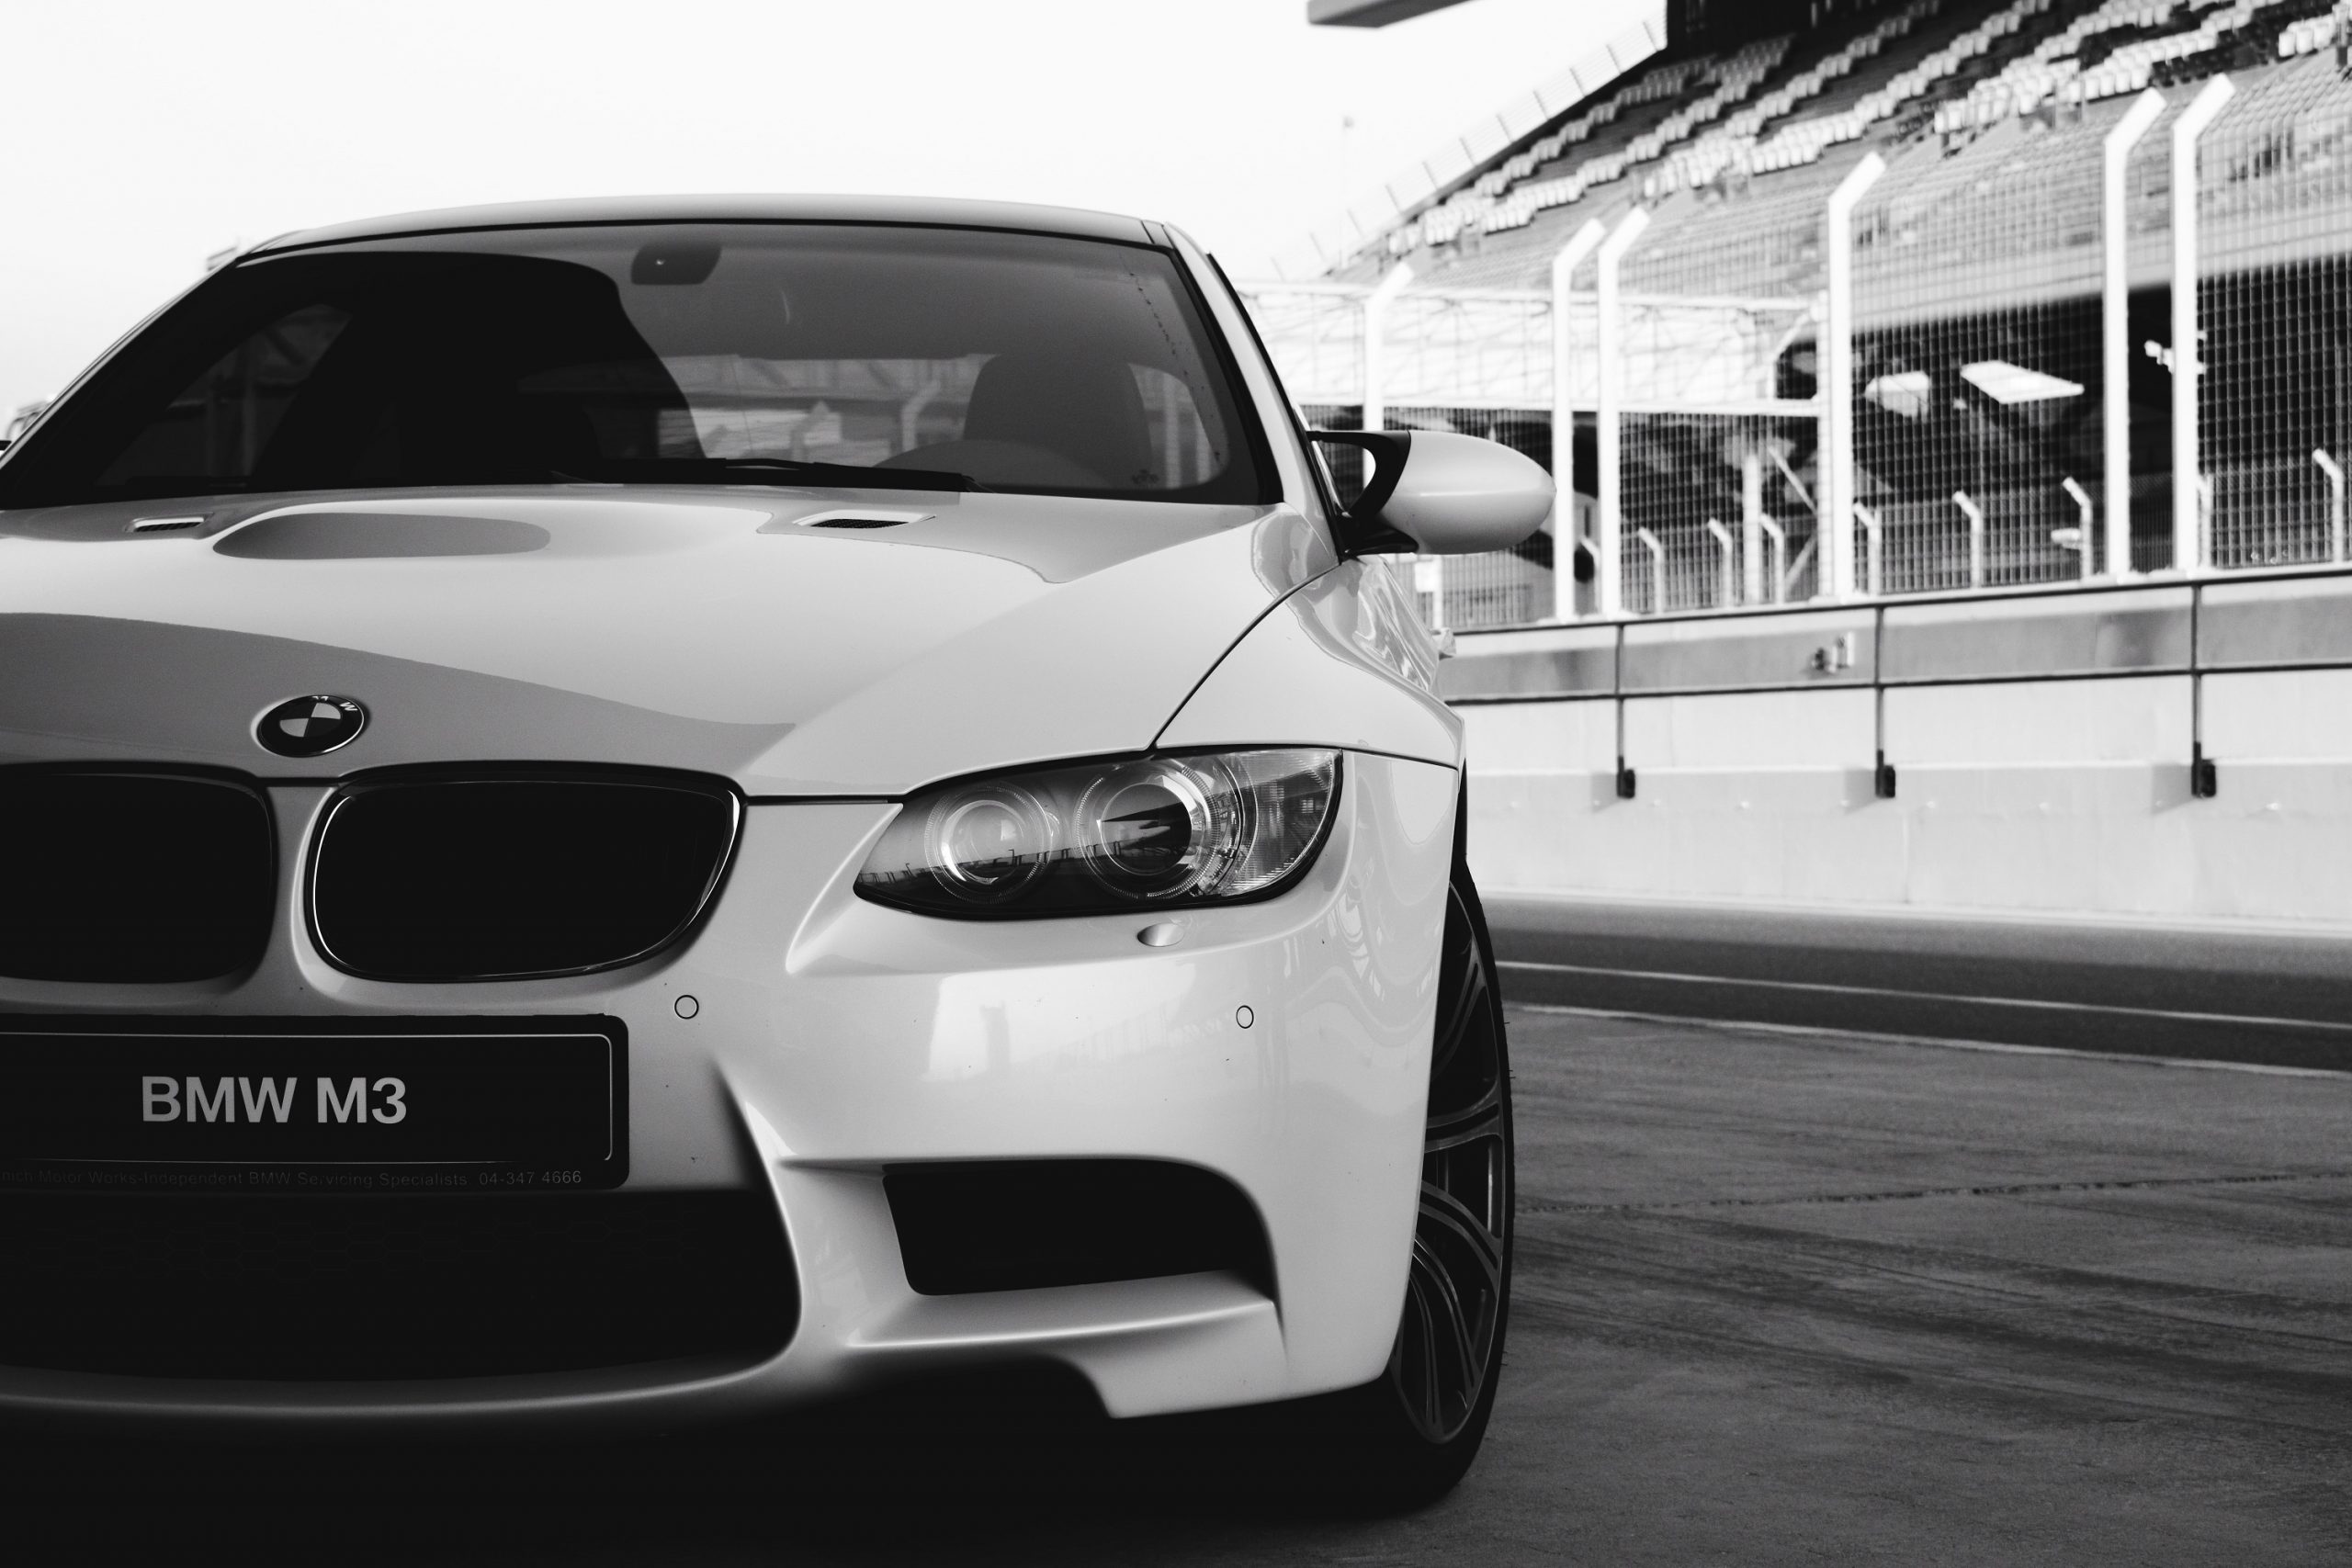 A white E92 BMW shot from the front headlights in black and white